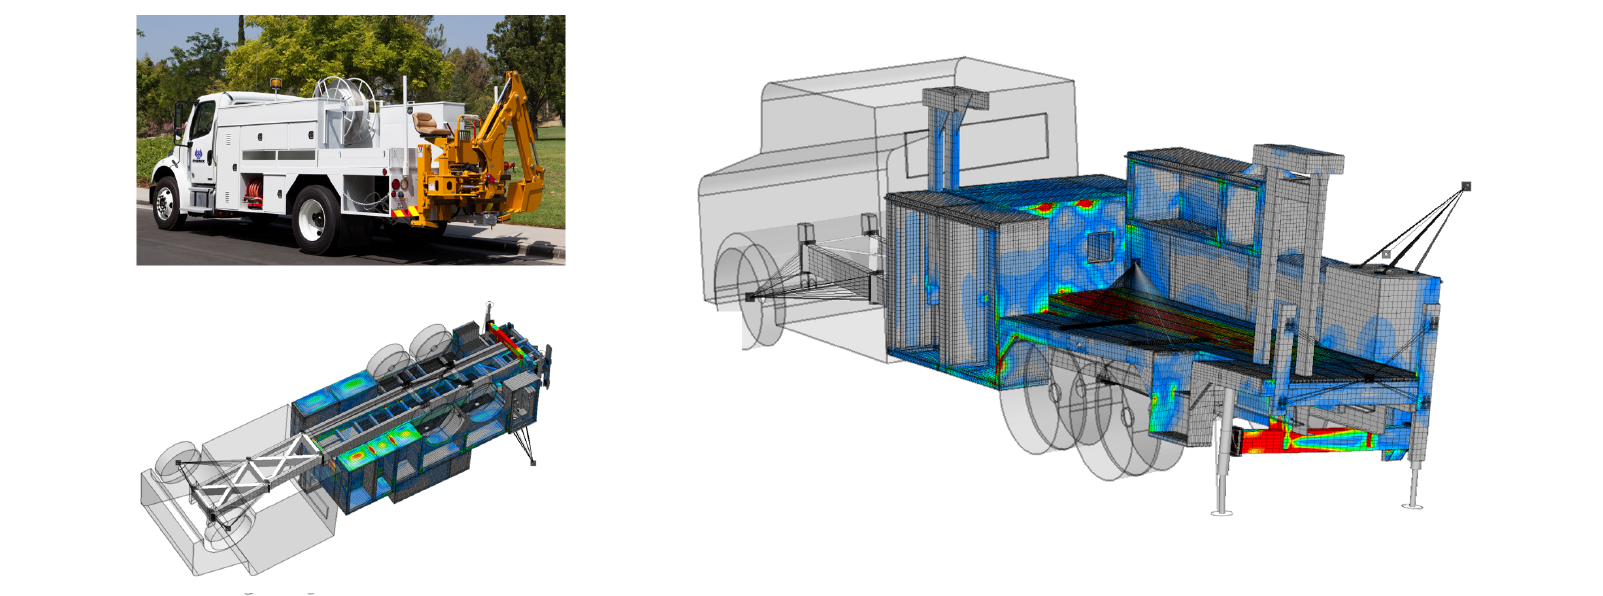 Stress Analysis of Truck Body Fabrication on 2-Ton Heavy Duty Truck Frame - FEA Services and Engineering